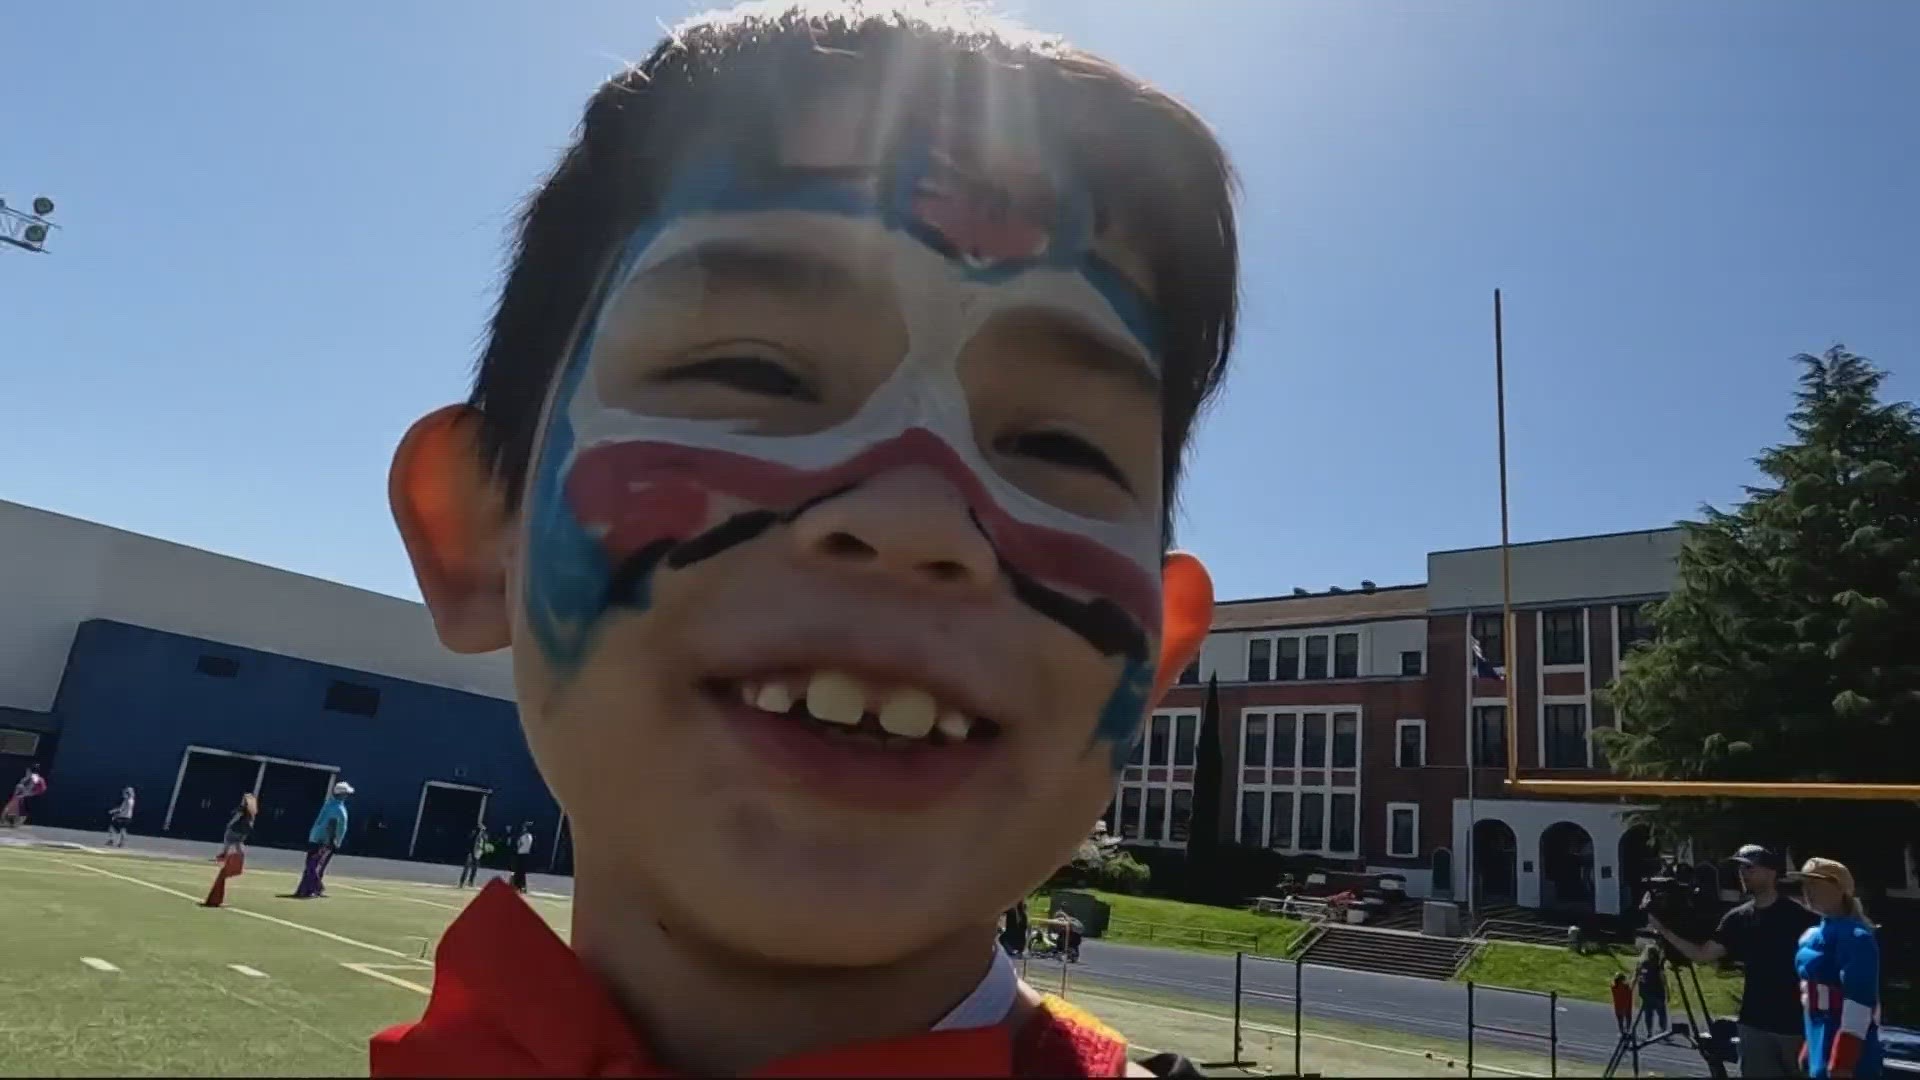 Portland Public Schools hosted an adapted field day event with a superhero theme for students with disabilities within the district.